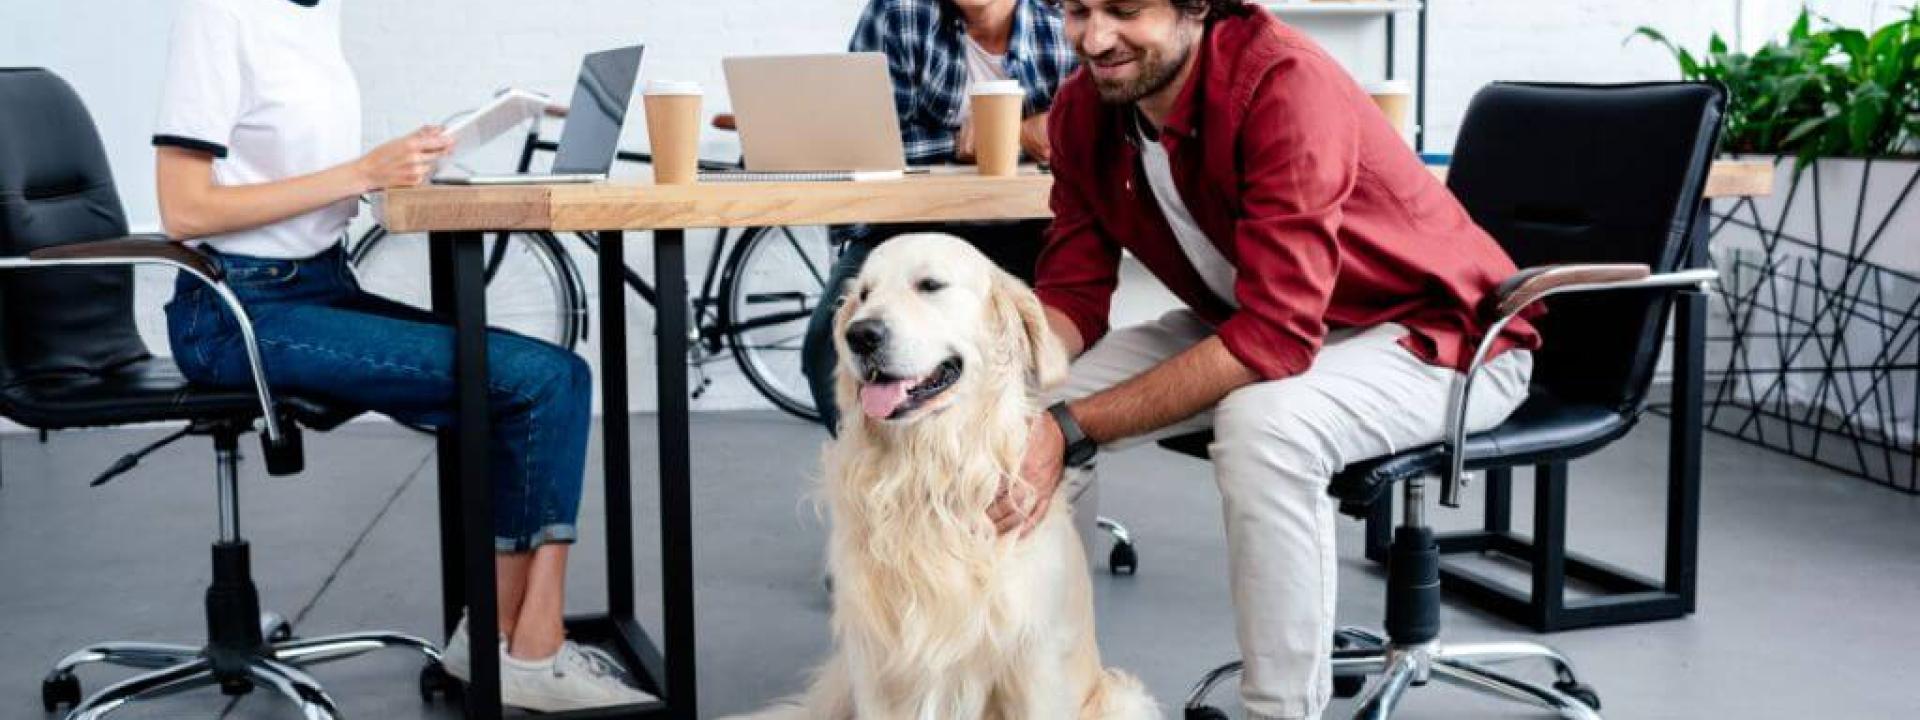 National Take Your Dog to Work Day – An Etiquette Guide to Success